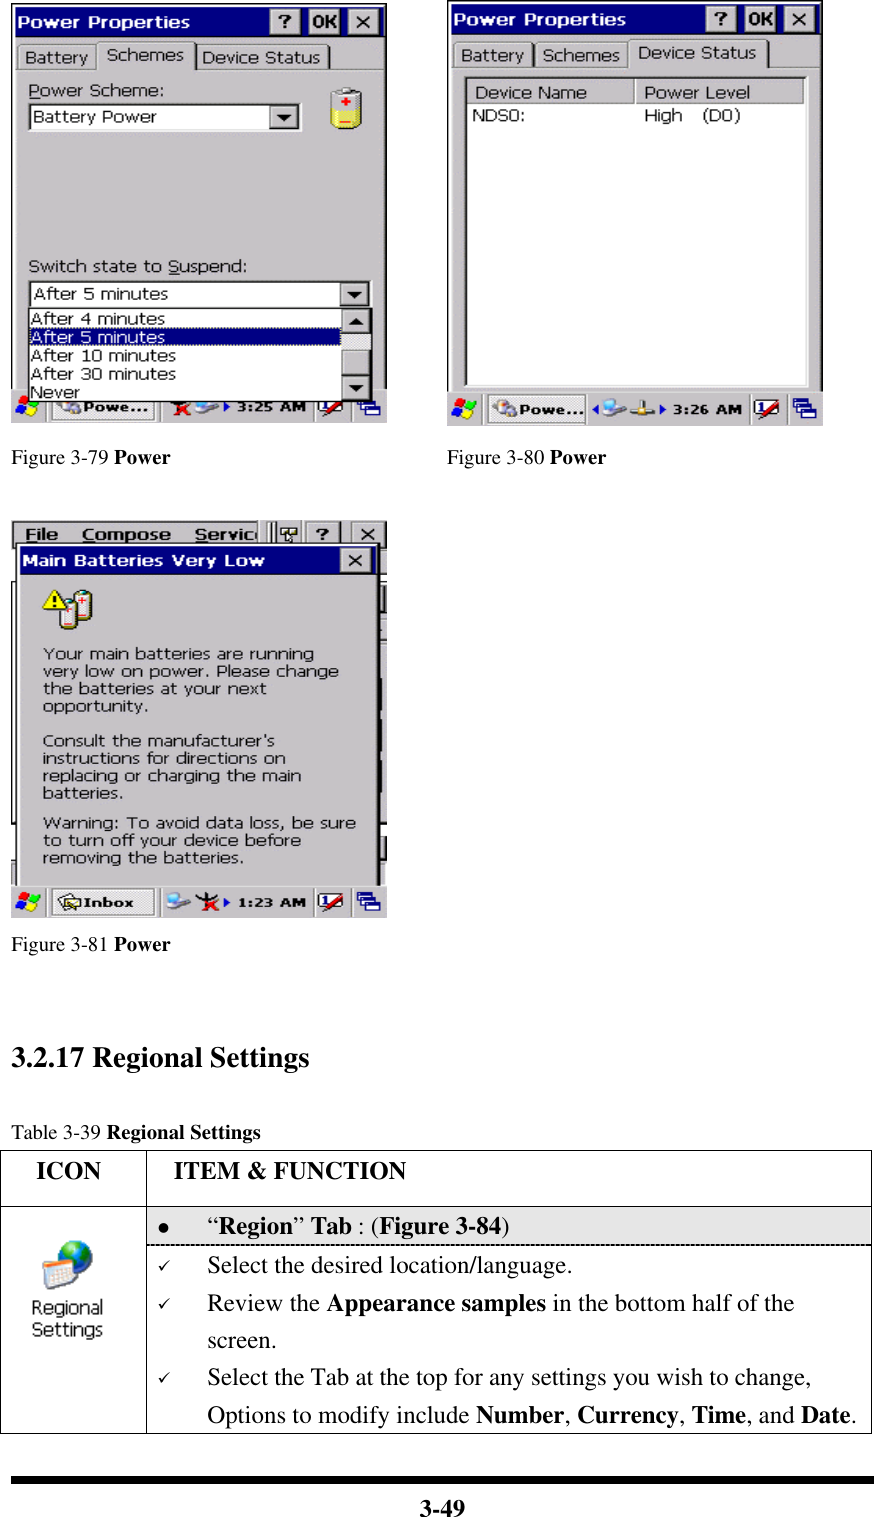  3-49   Figure 3-79 Power Figure 3-80 Power      Figure 3-81 Power    3.2.17 Regional Settings  Table 3-39 Regional Settings   ICON  ITEM &amp; FUNCTION l “Region” Tab : (Figure 3-84)  ü Select the desired location/language. ü Review the Appearance samples in the bottom half of the screen. ü Select the Tab at the top for any settings you wish to change, Options to modify include Number, Currency, Time, and Date. 